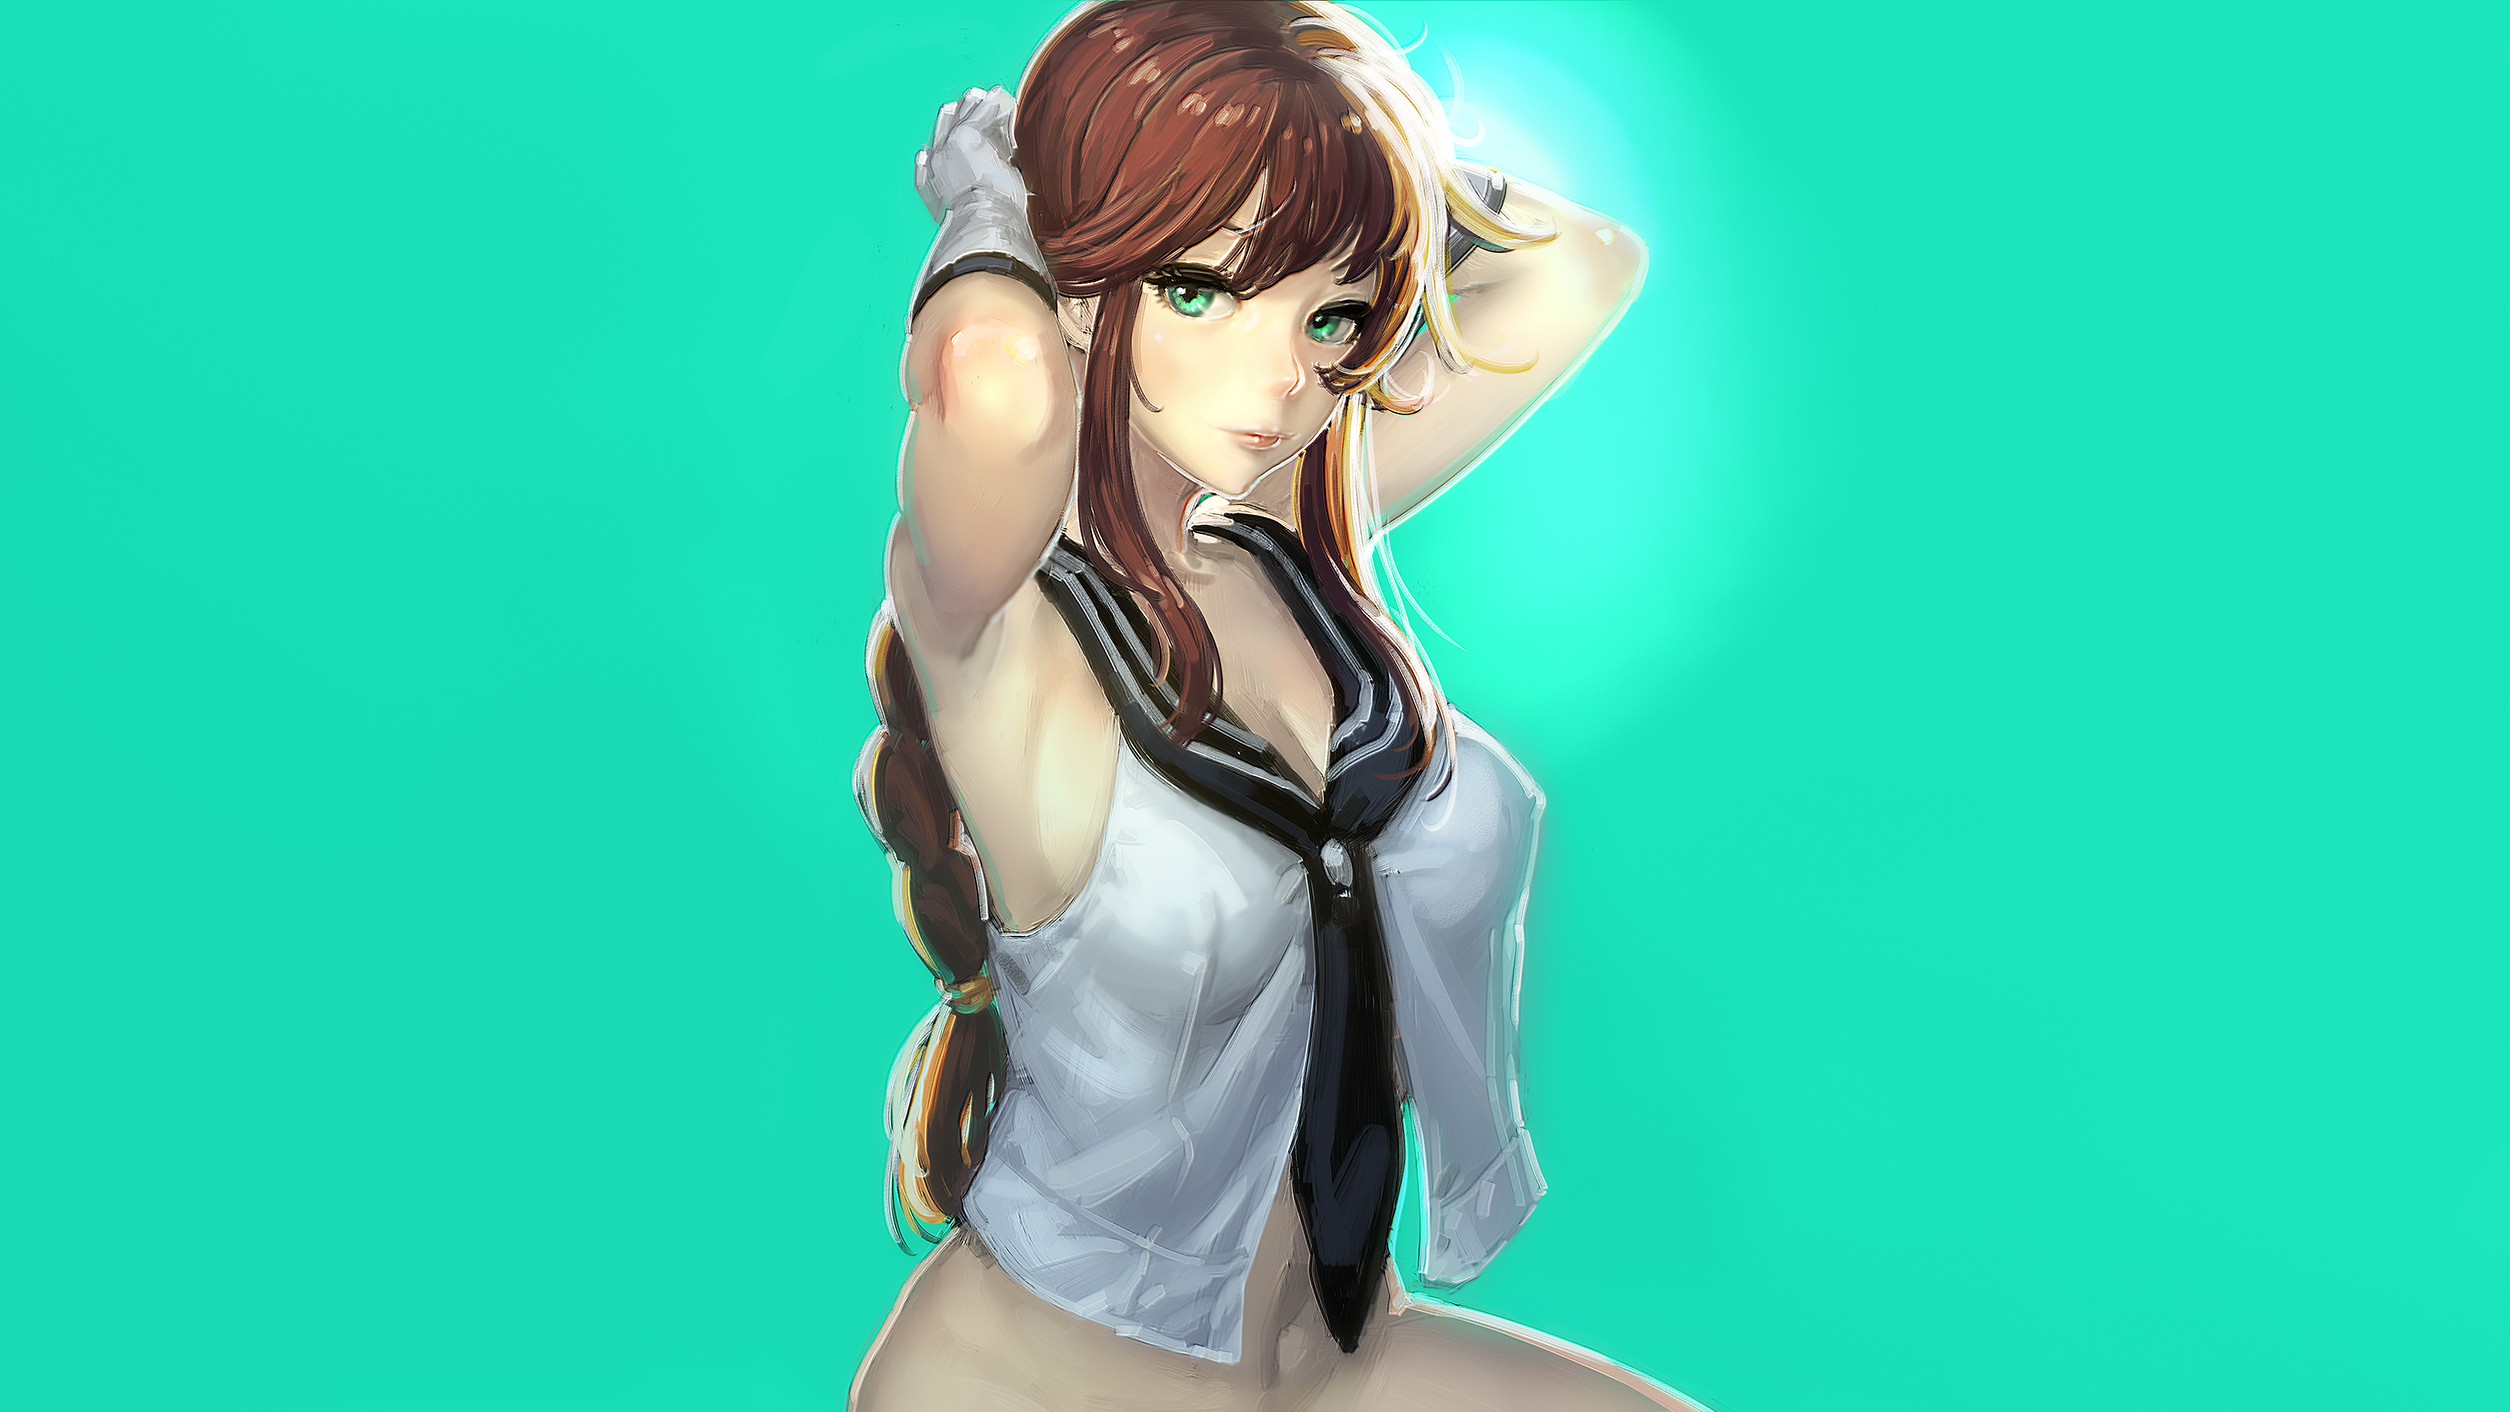 Anime 2510x1412 armpits anime anime girls open shirt cyan background cyan women tie simple background green eyes long hair brunette belly looking at viewer